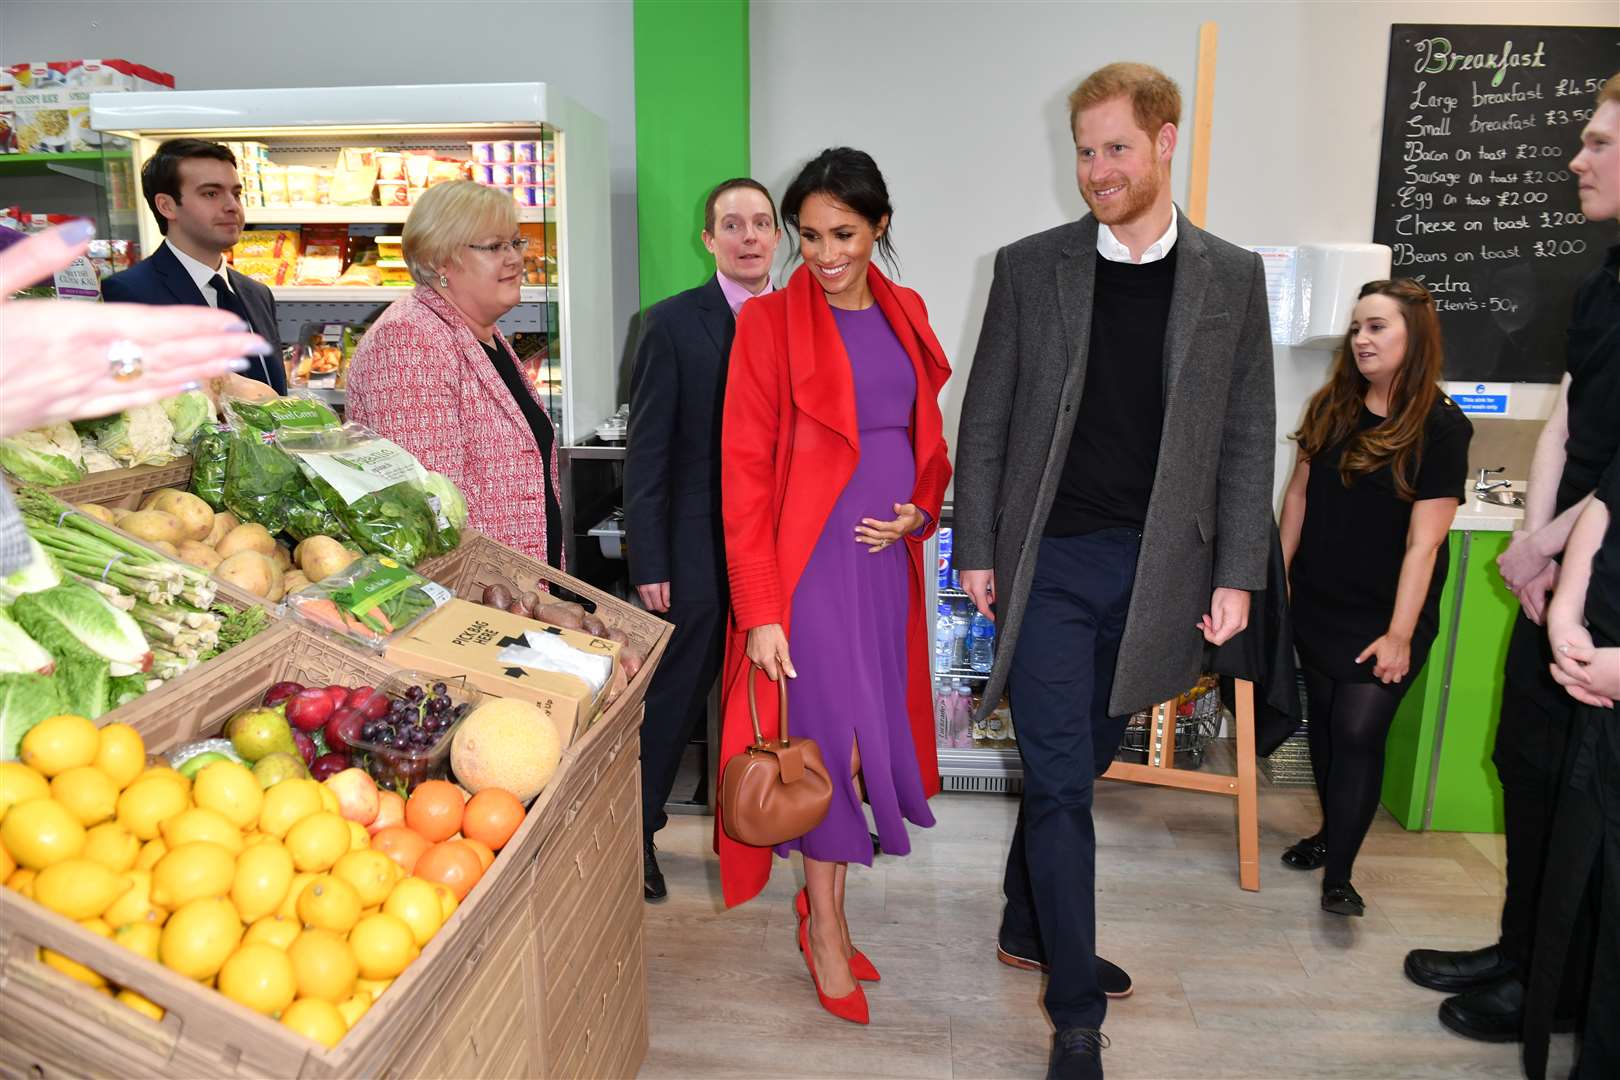 The Duke and Duchess of Sussex officially opening Number 7, a Feeding Birkenhead citizens supermarket and community cafe in January 2019 (Anthony Devlin/PA)